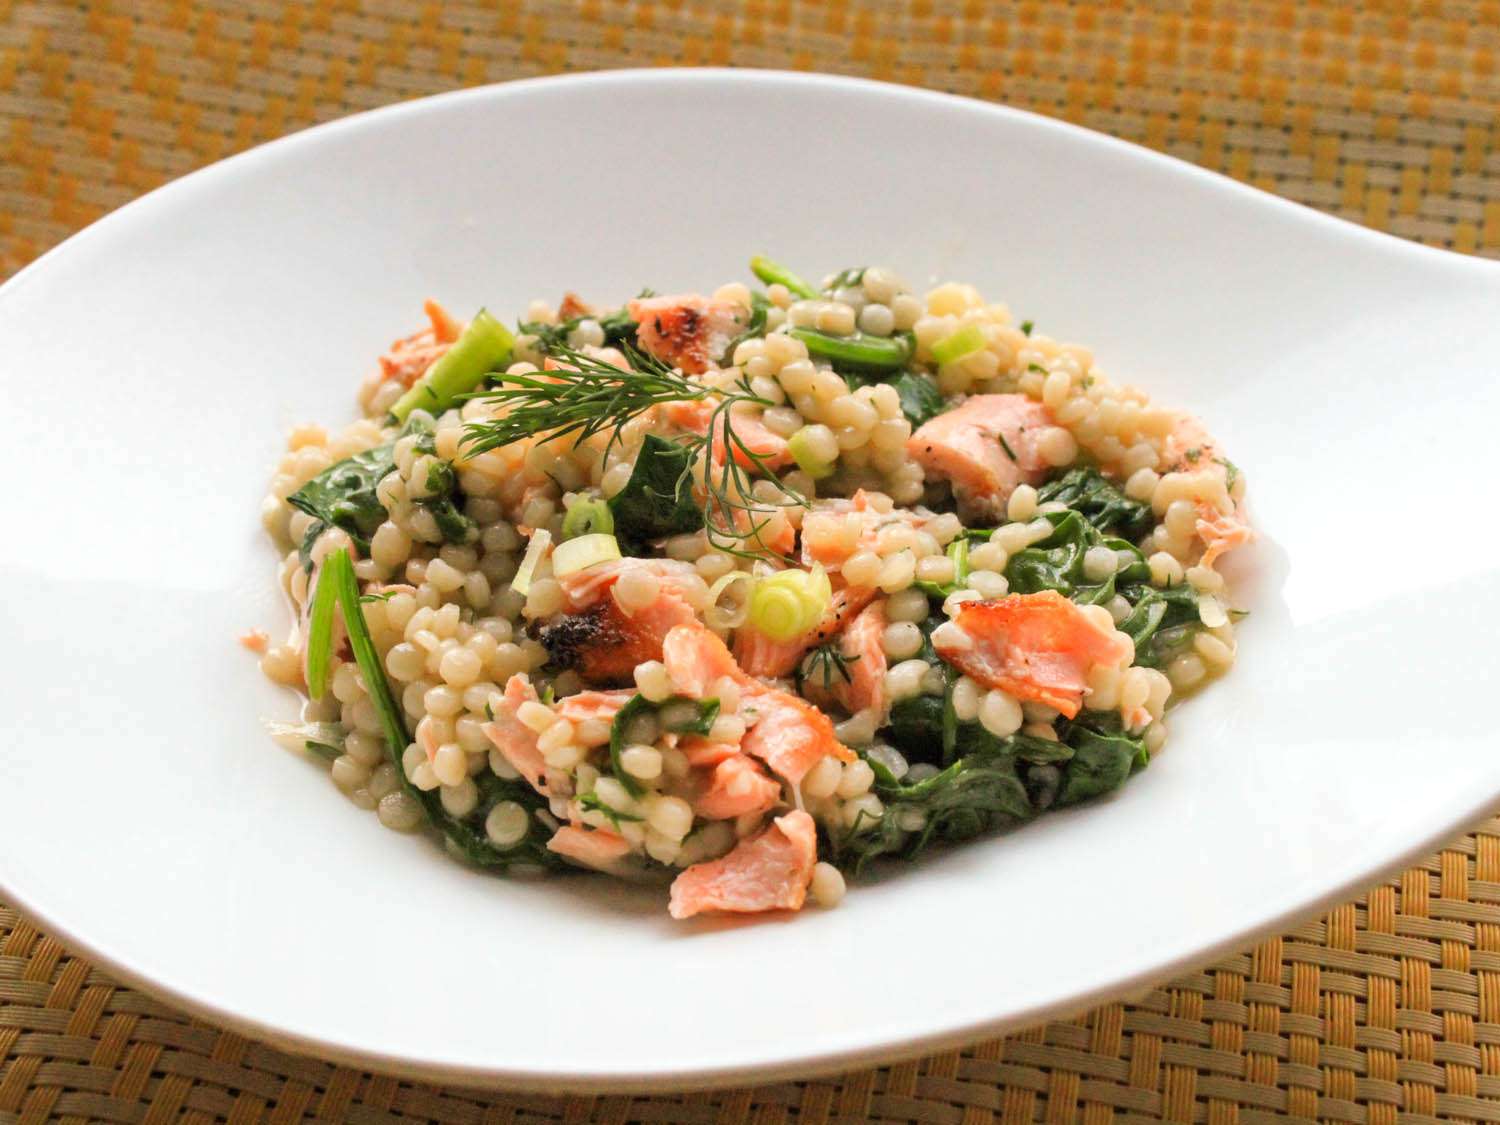 Finished couscous salad with salmon and dill on a plate.